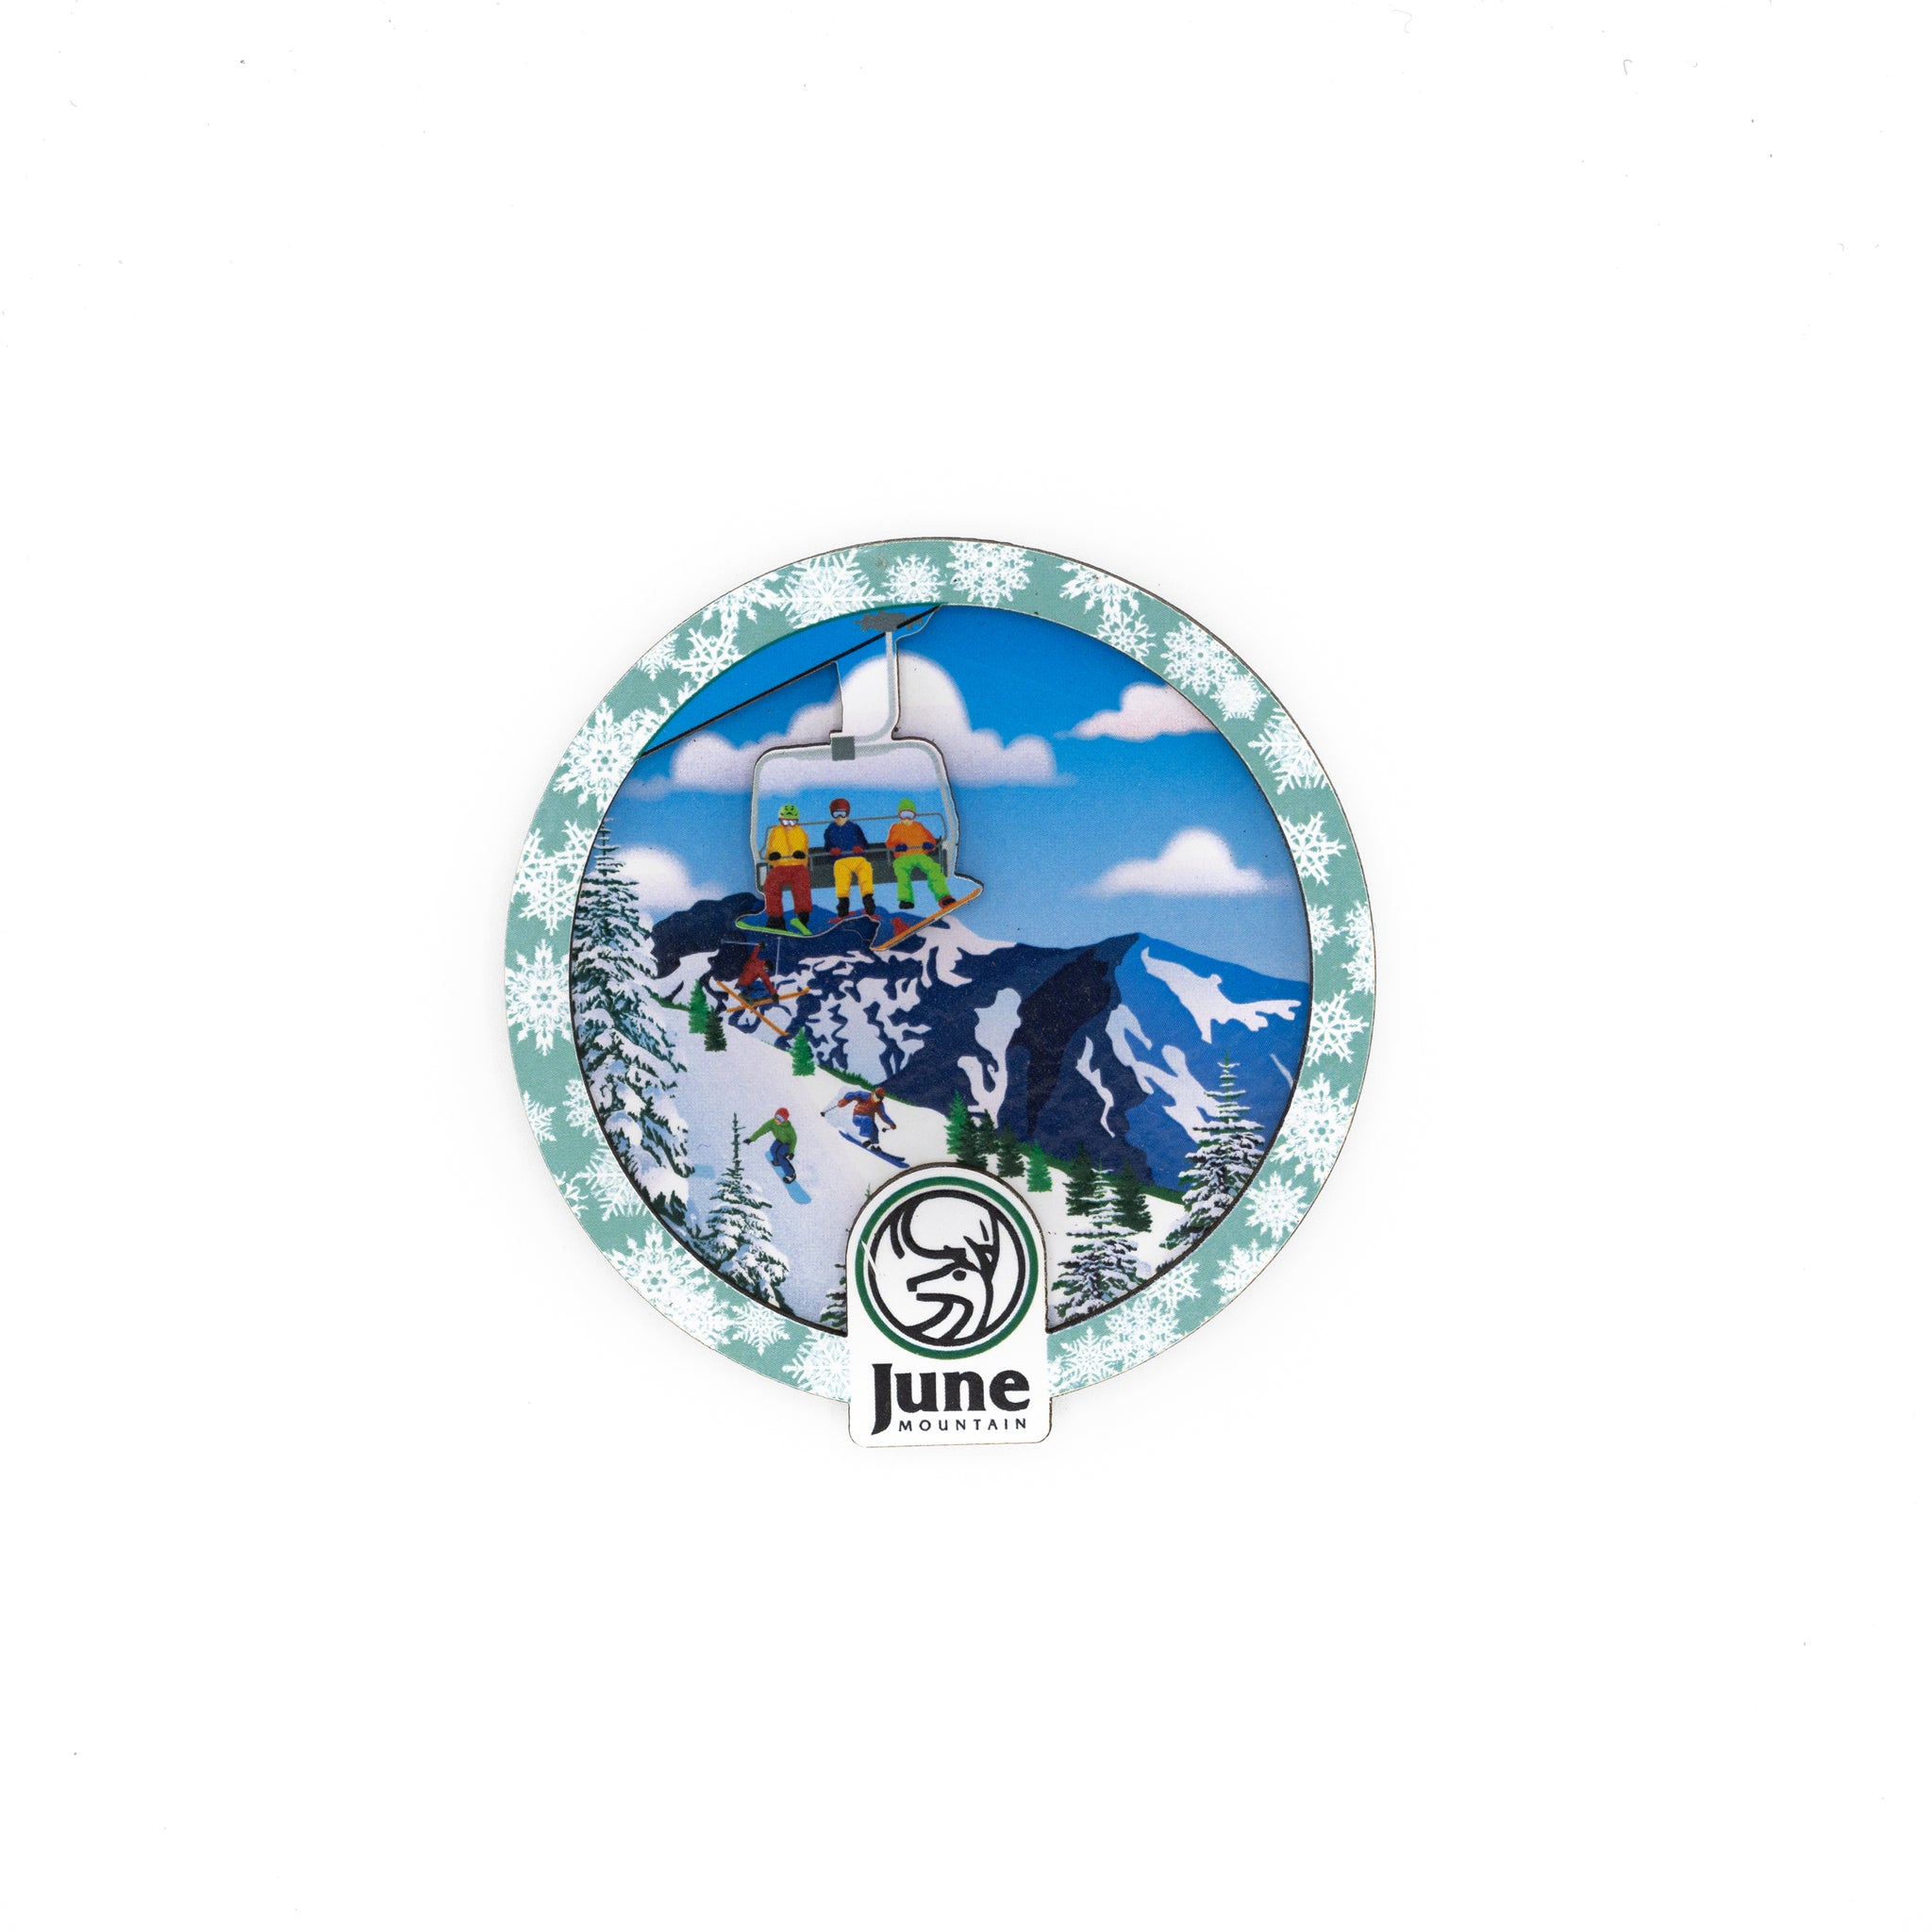 JUNE MOUNTAIN ROUND LIFT MAGNET